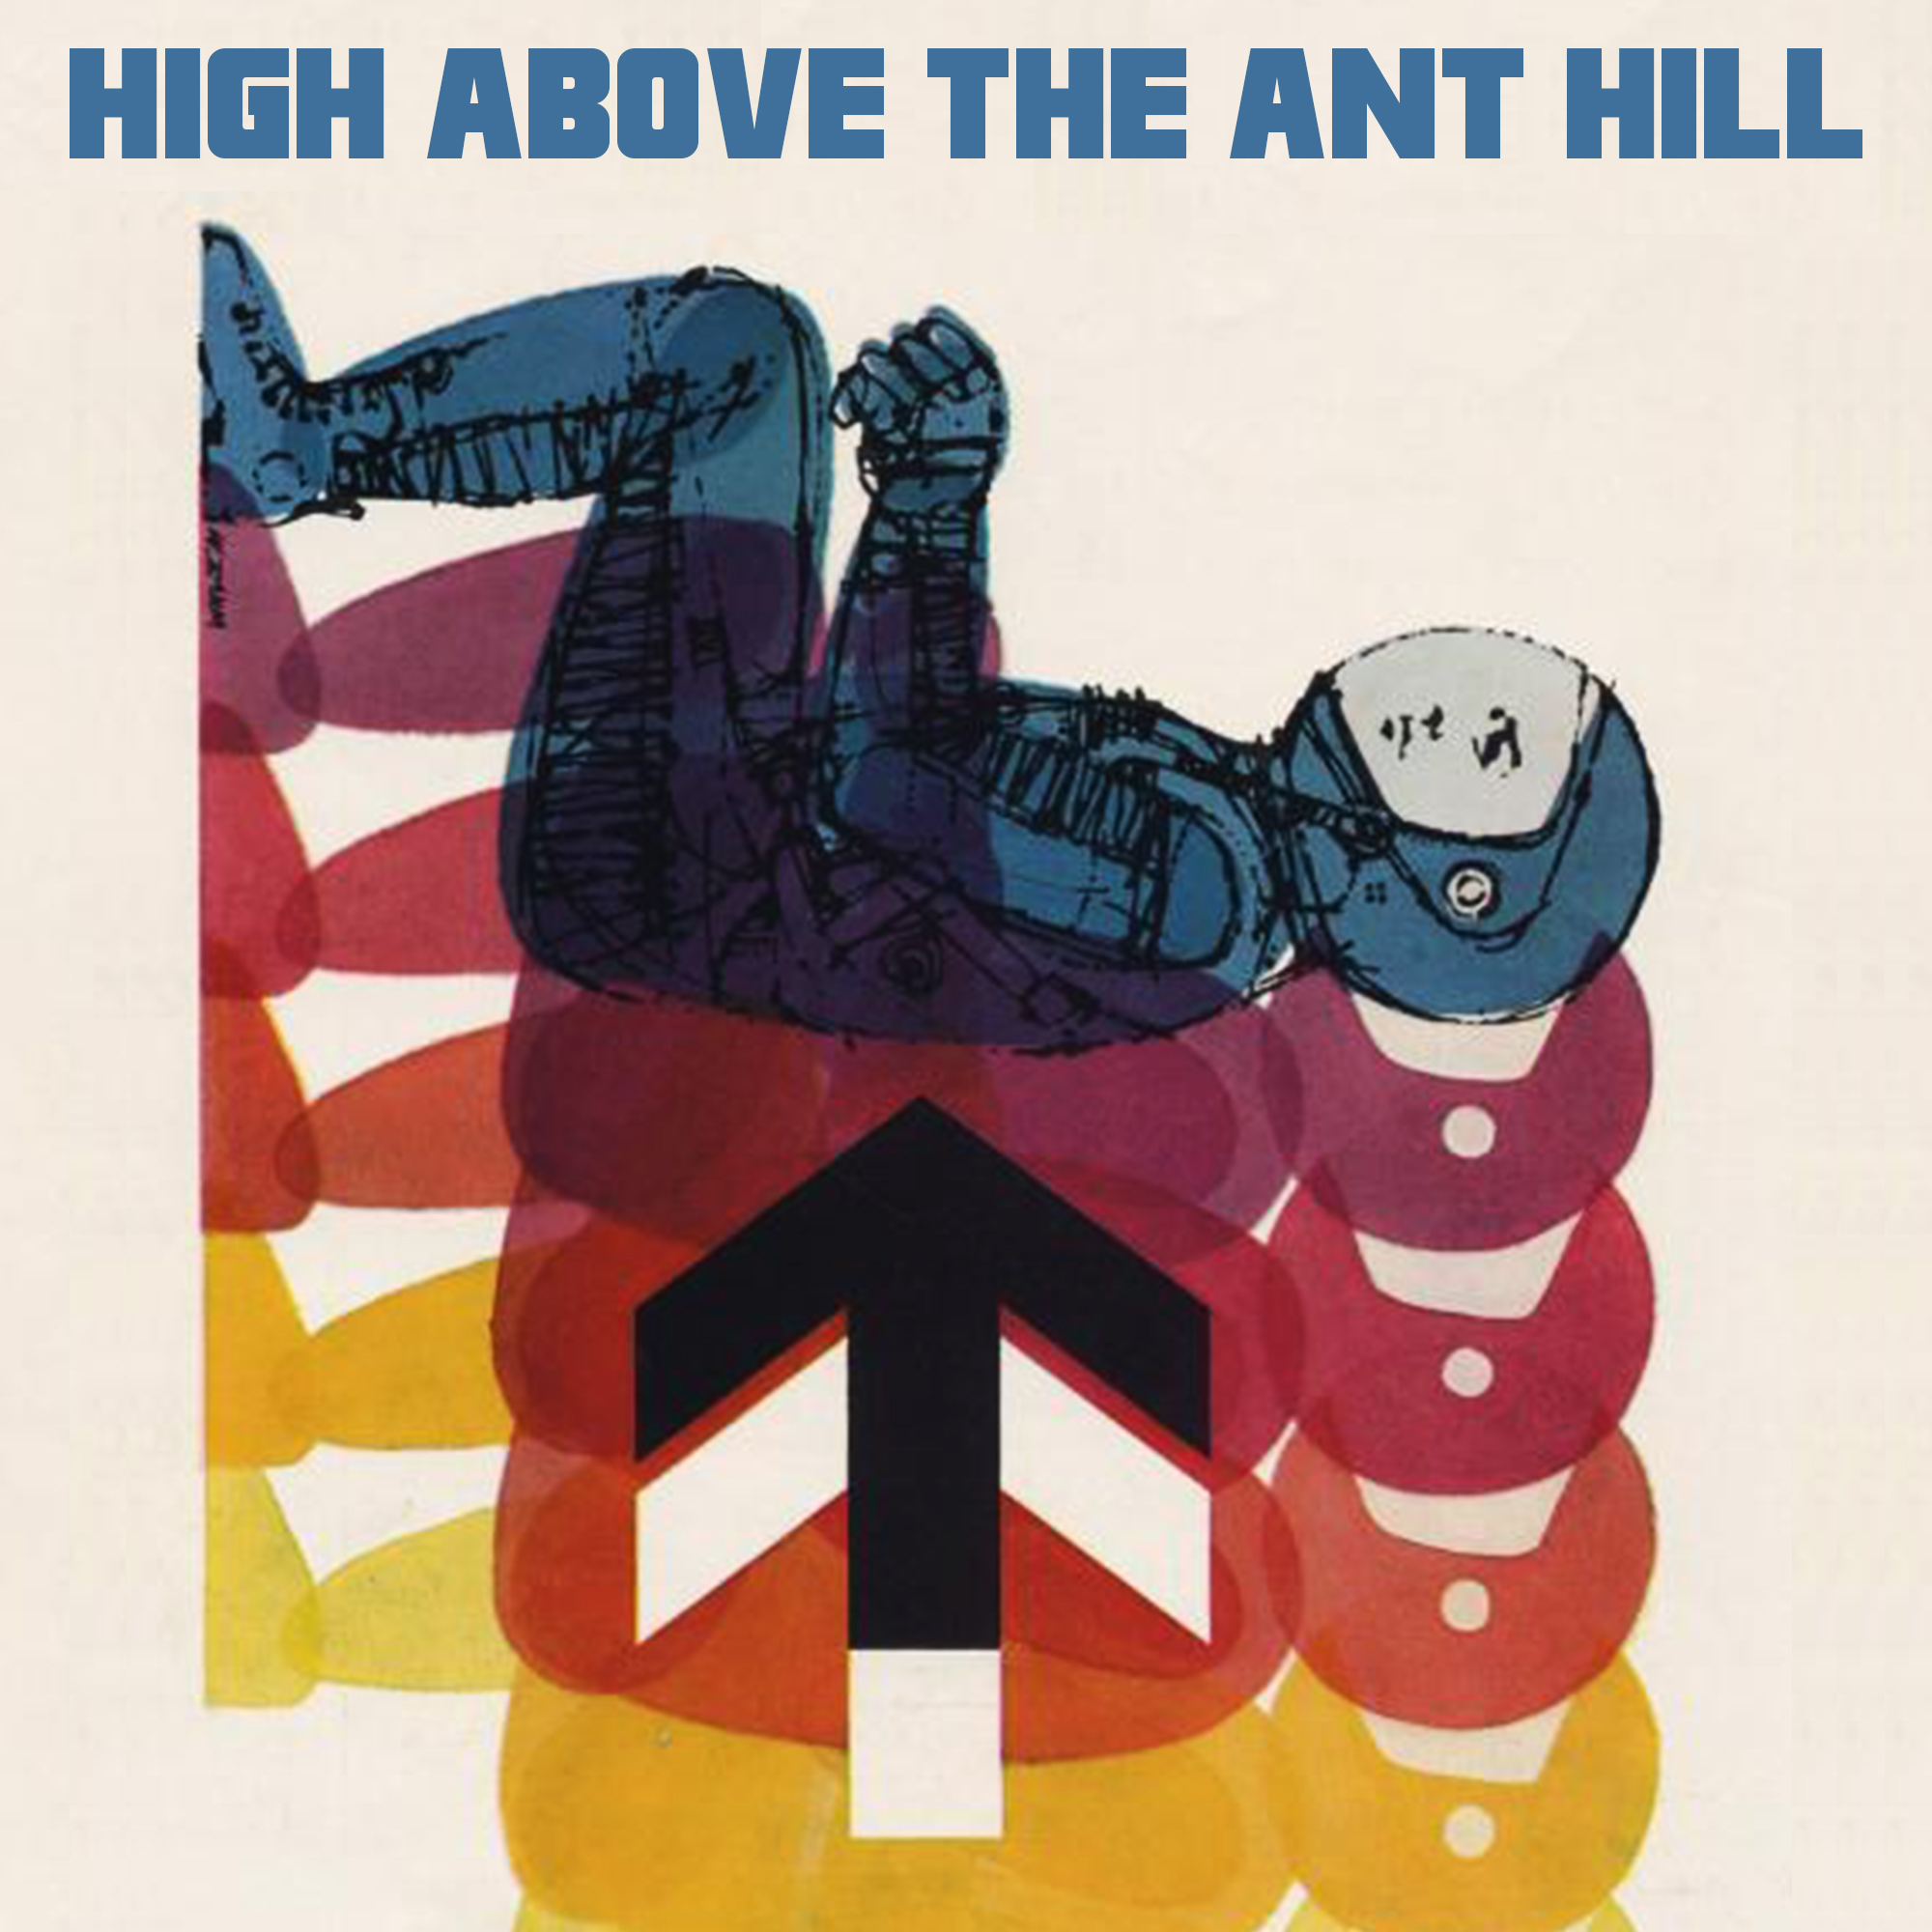 Broken Lamps - High Above The Ant Hill